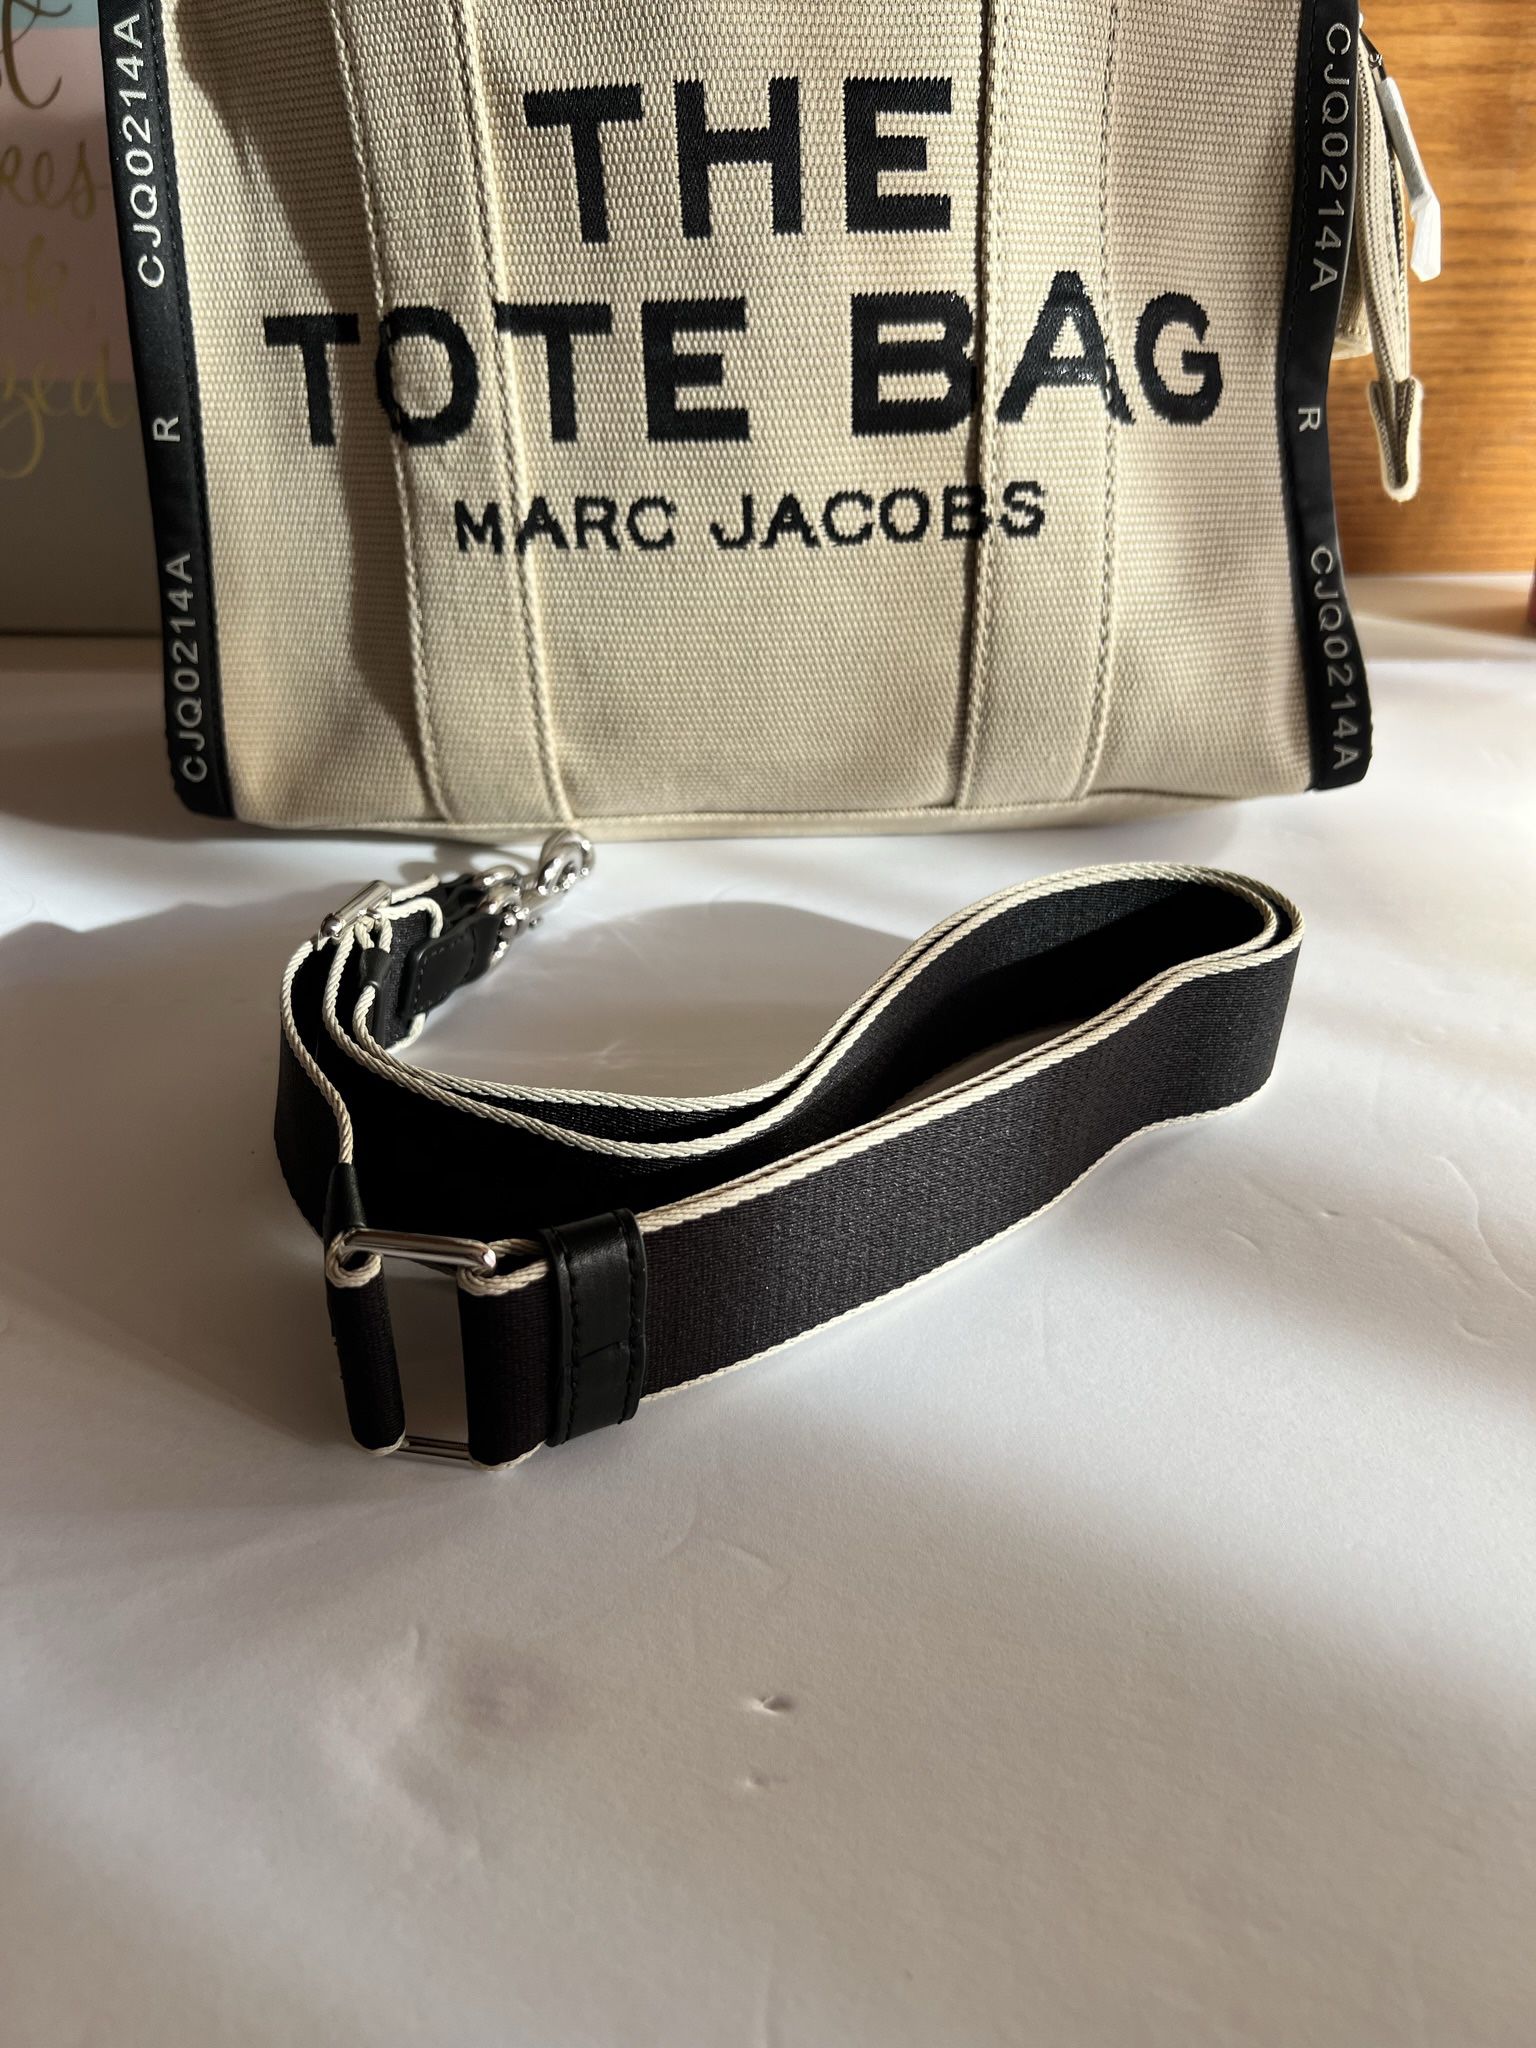 Marc Jacobs The Teddy Mini Tote Bag—Purple for Sale in Cary, NC - OfferUp